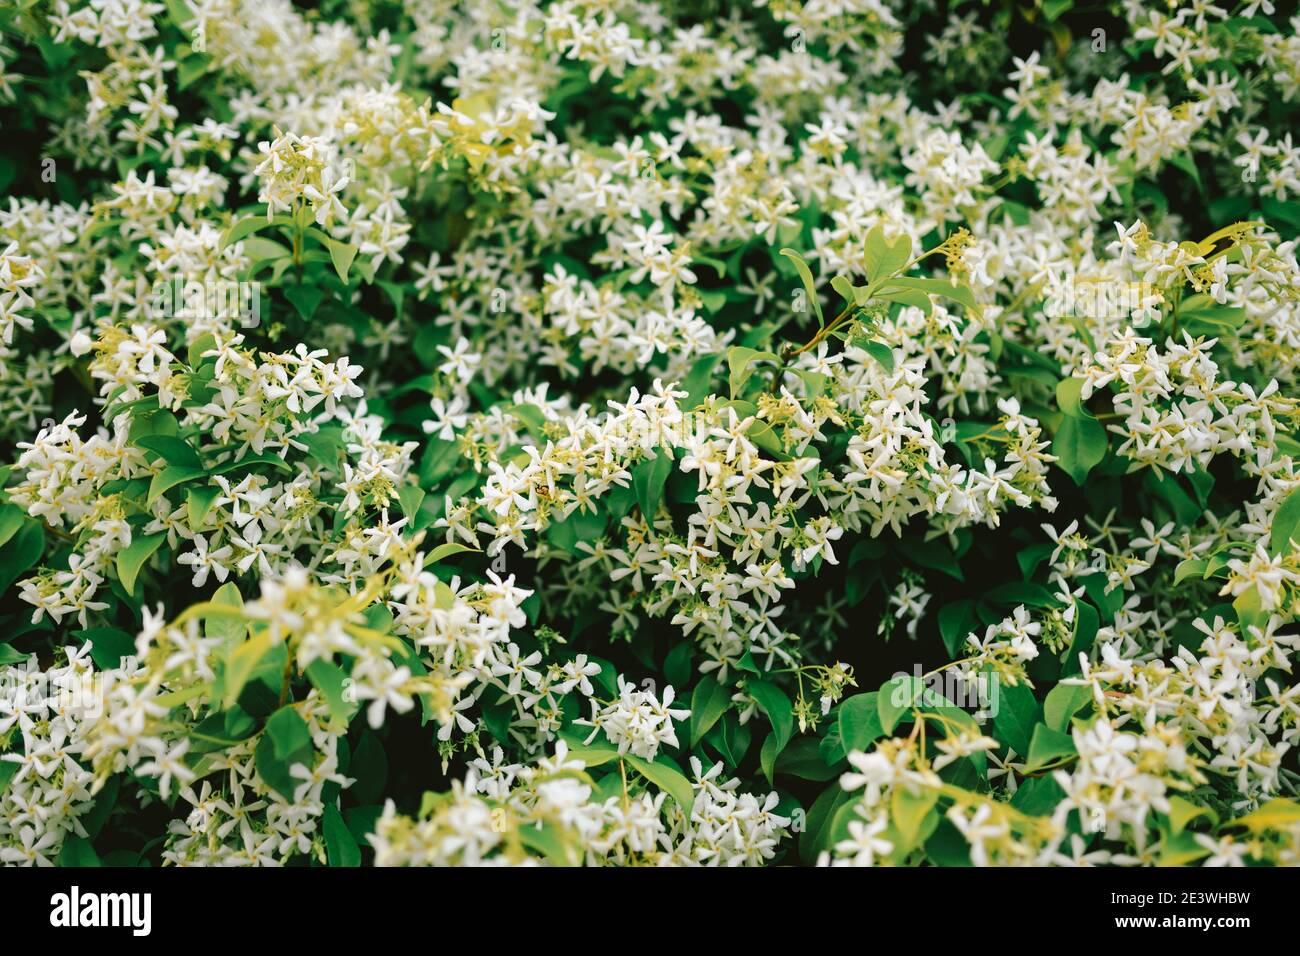 Close-up of jasmine with green leaves and flowers. Stock Photo